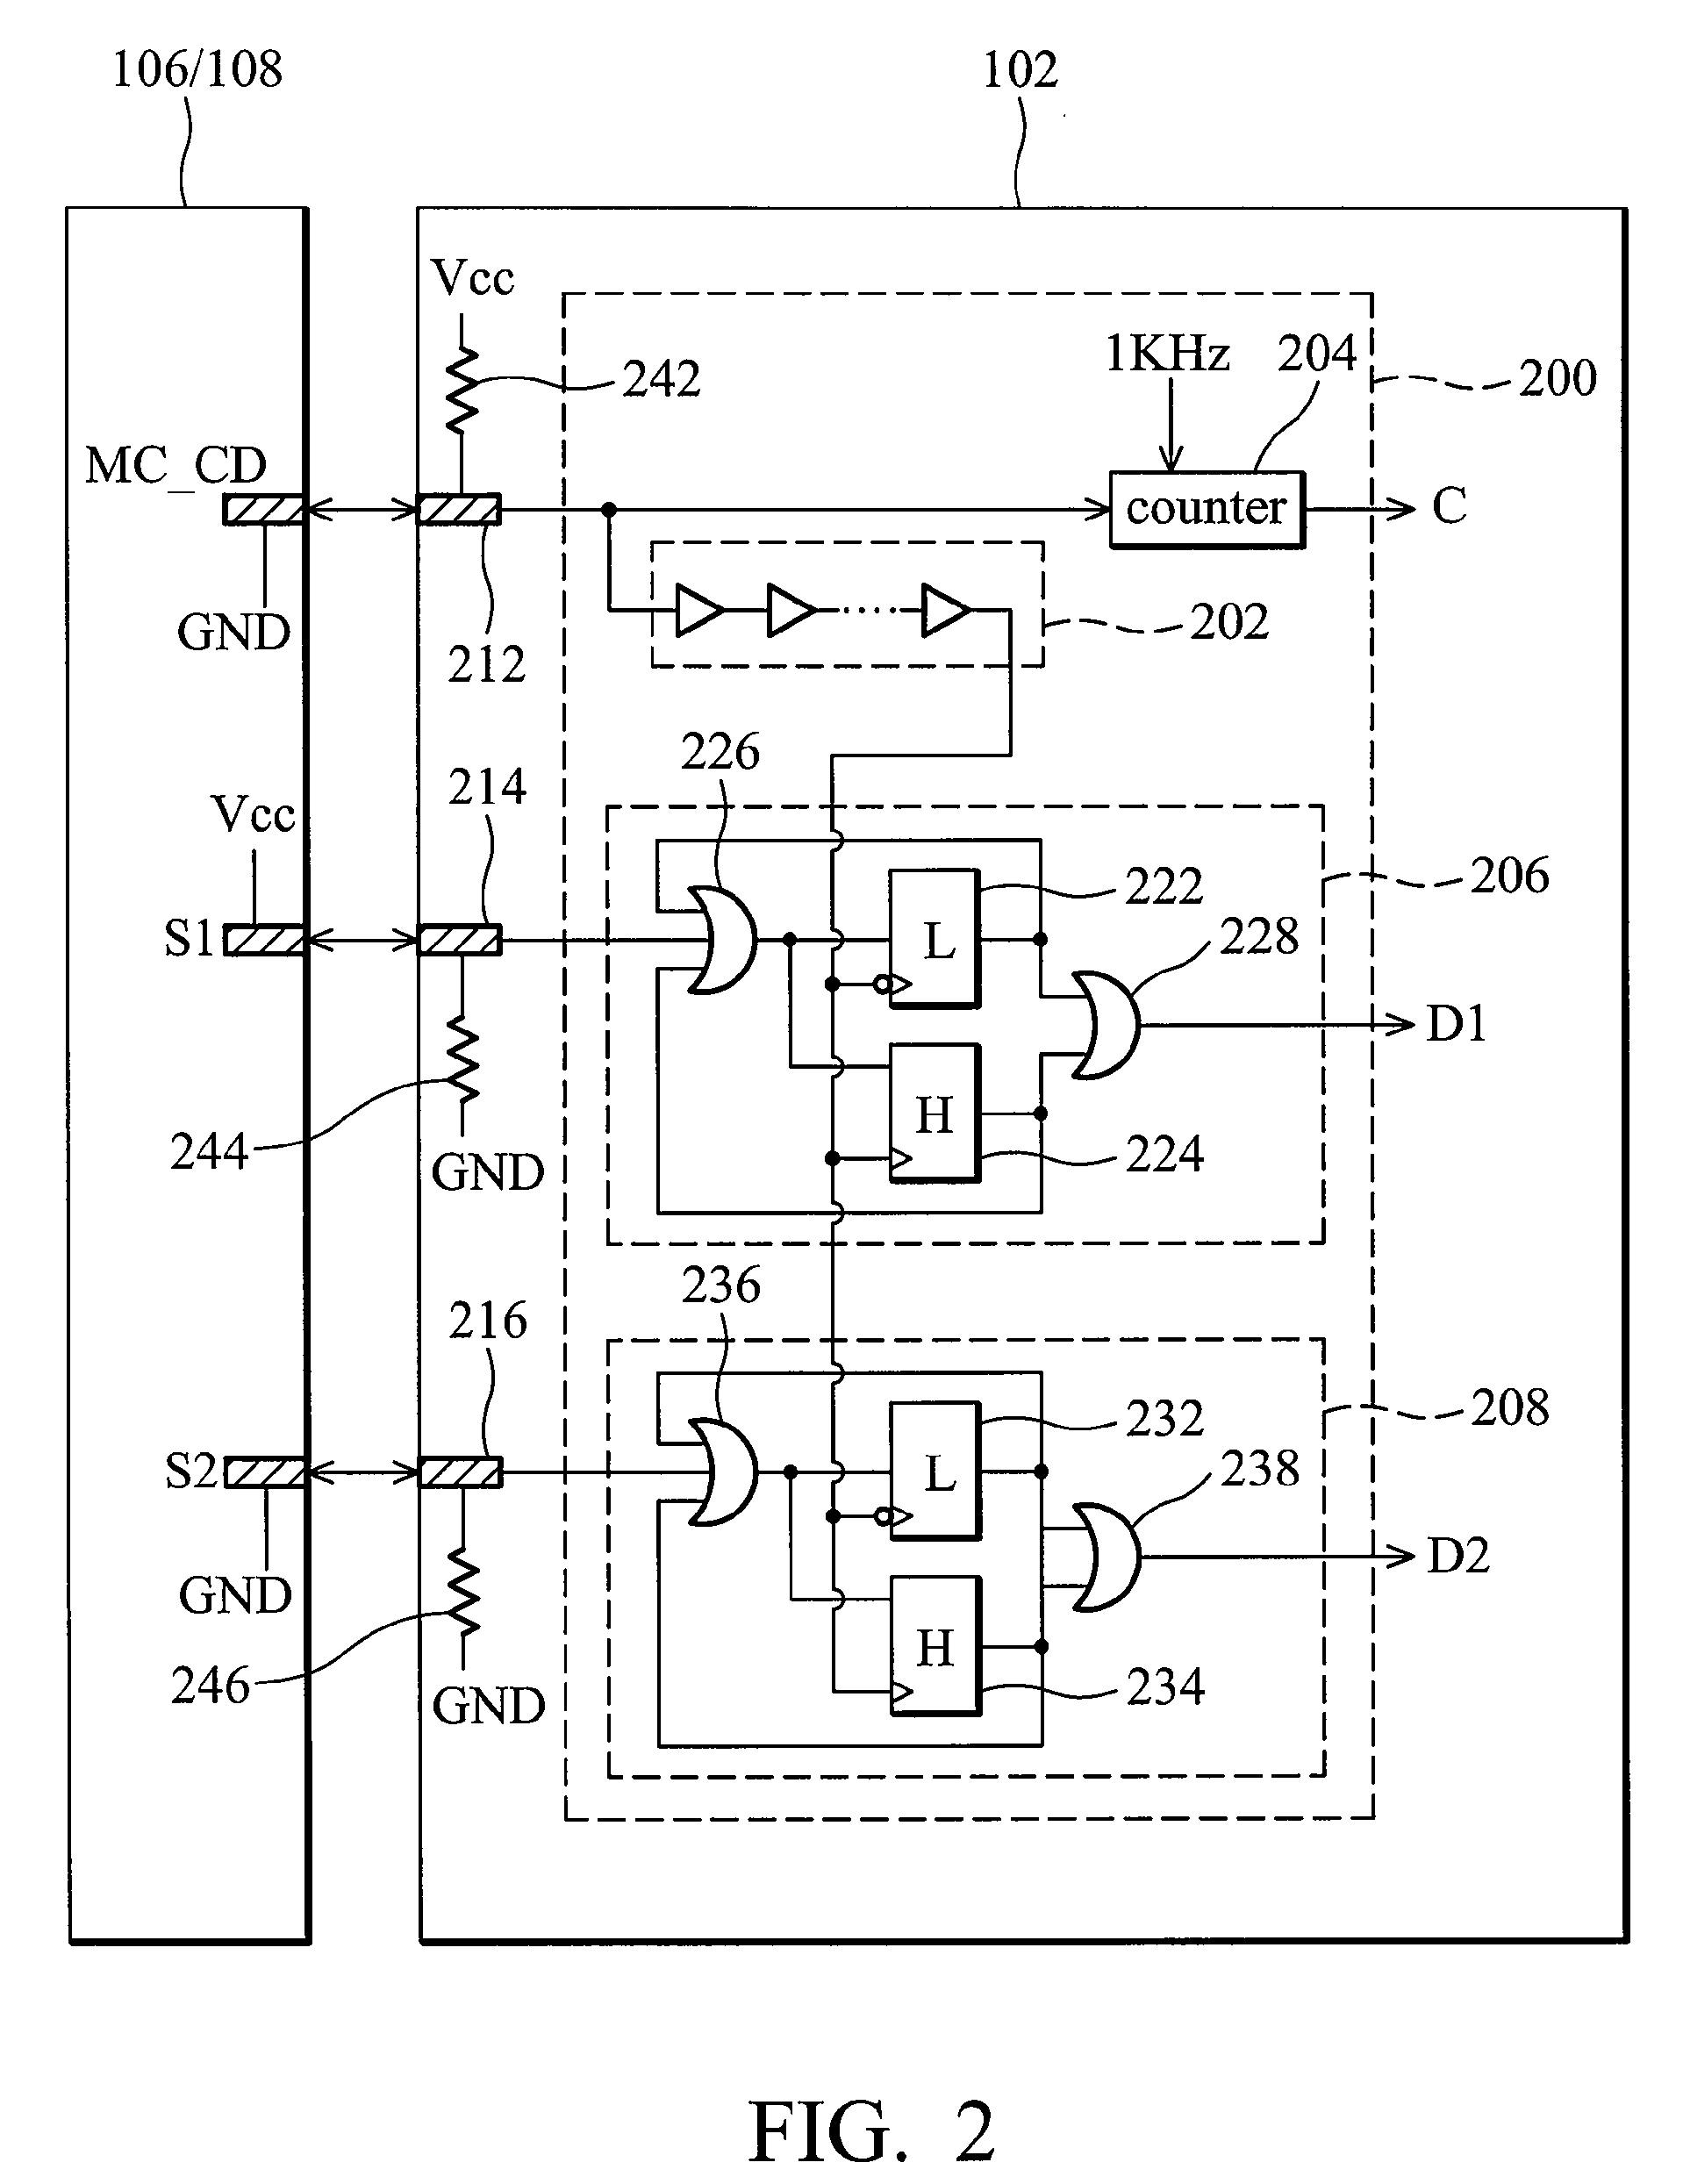 Memory card detection circuit and method thereof